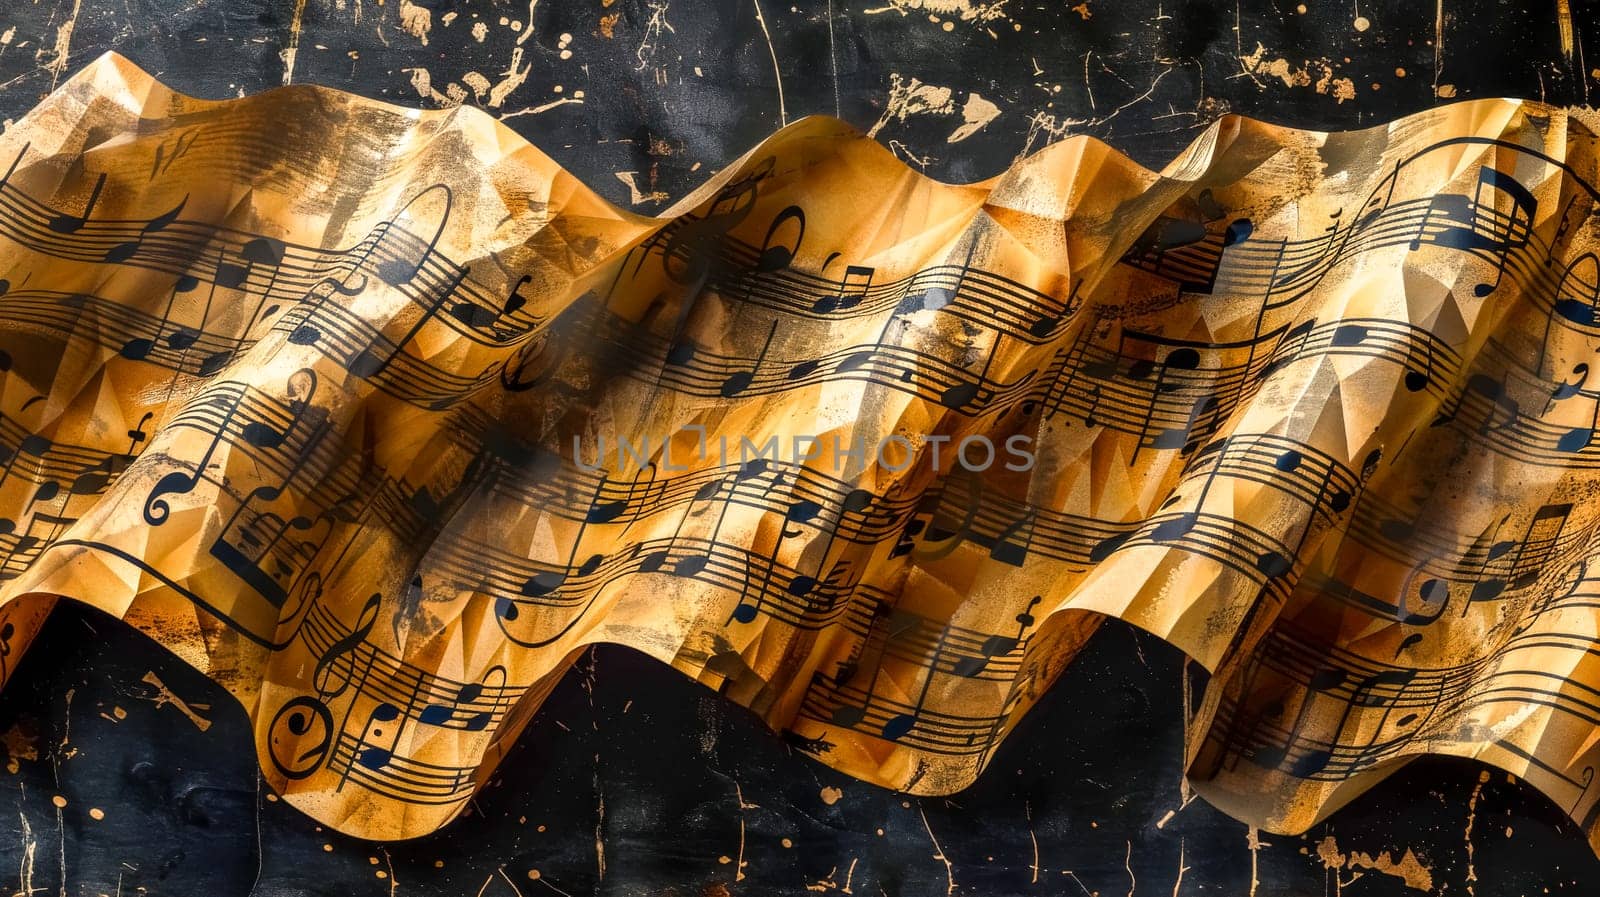 Wavy aged music sheet with notes on a grungy black backdrop by Edophoto